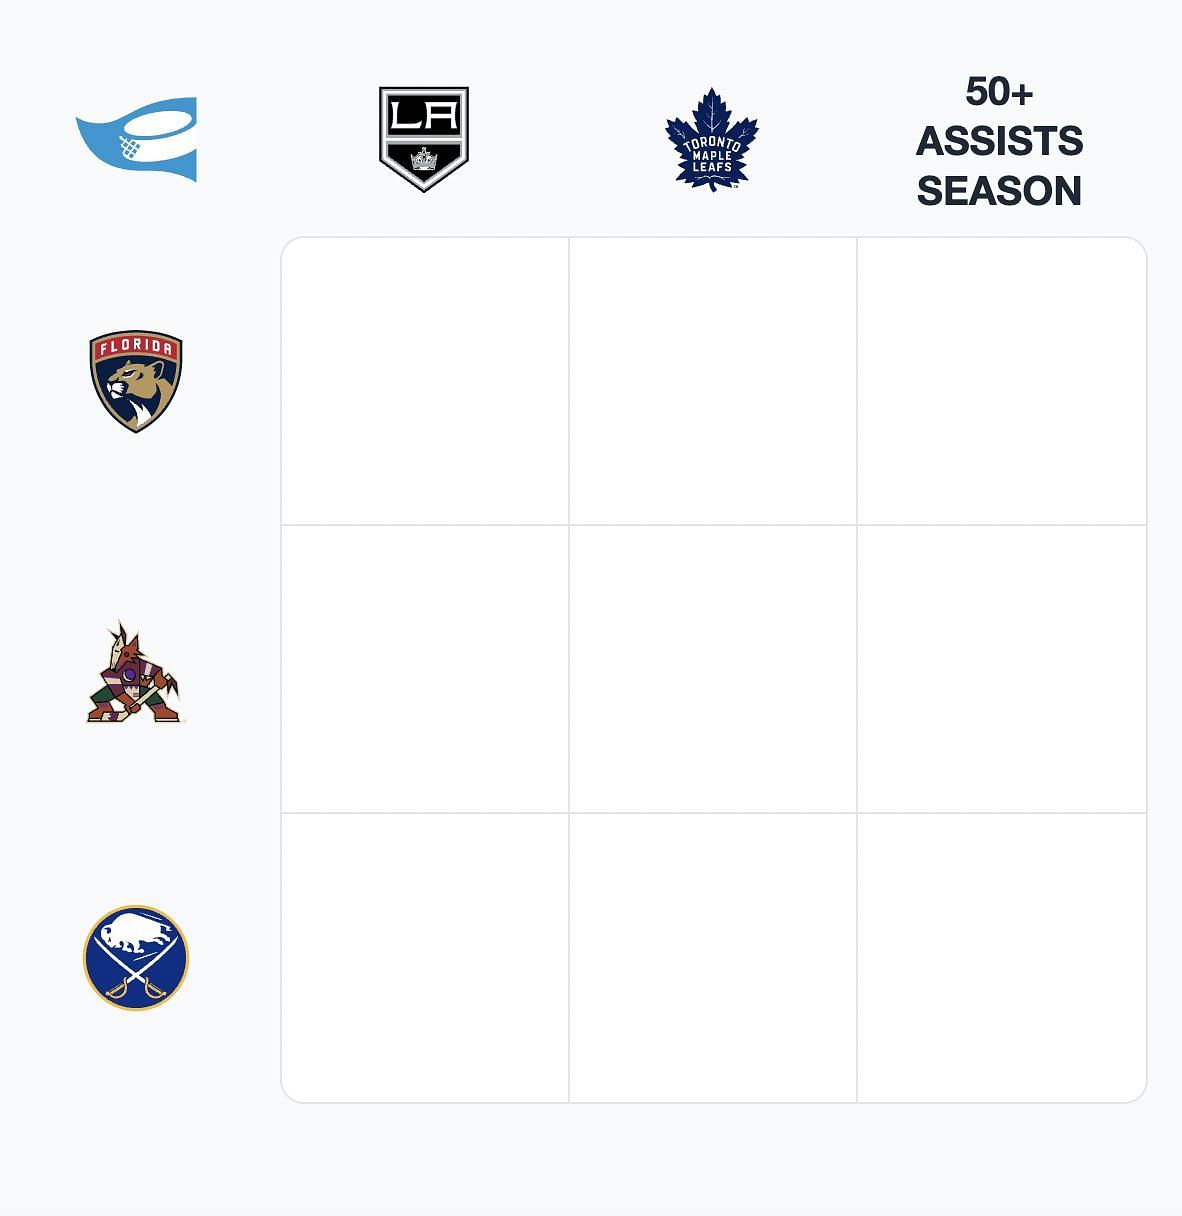 Everything You Need to Know About the 2020 NHL Playoffs